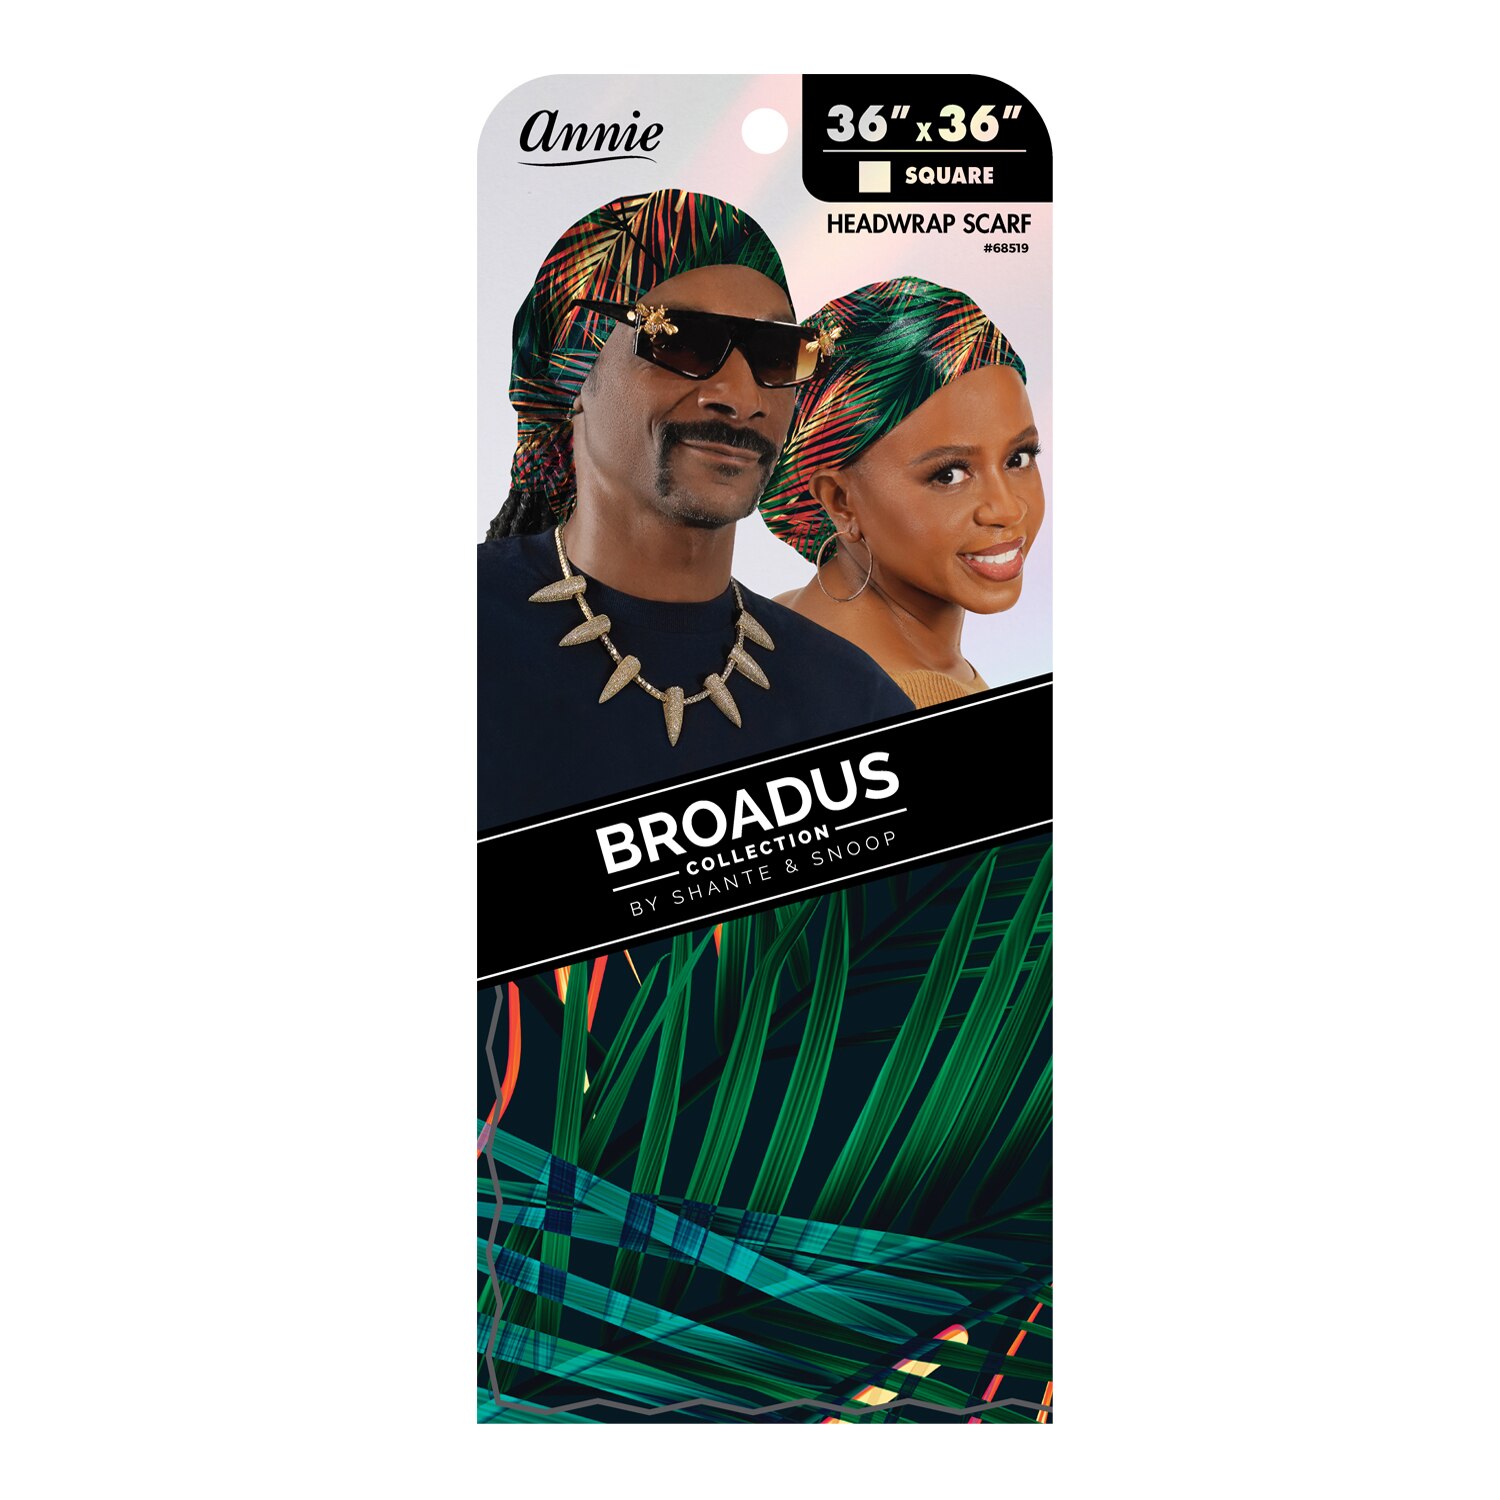 Annie Broadus Collection Headwrap Scarf, Island Palm, 36 In. X 36 In. , CVS